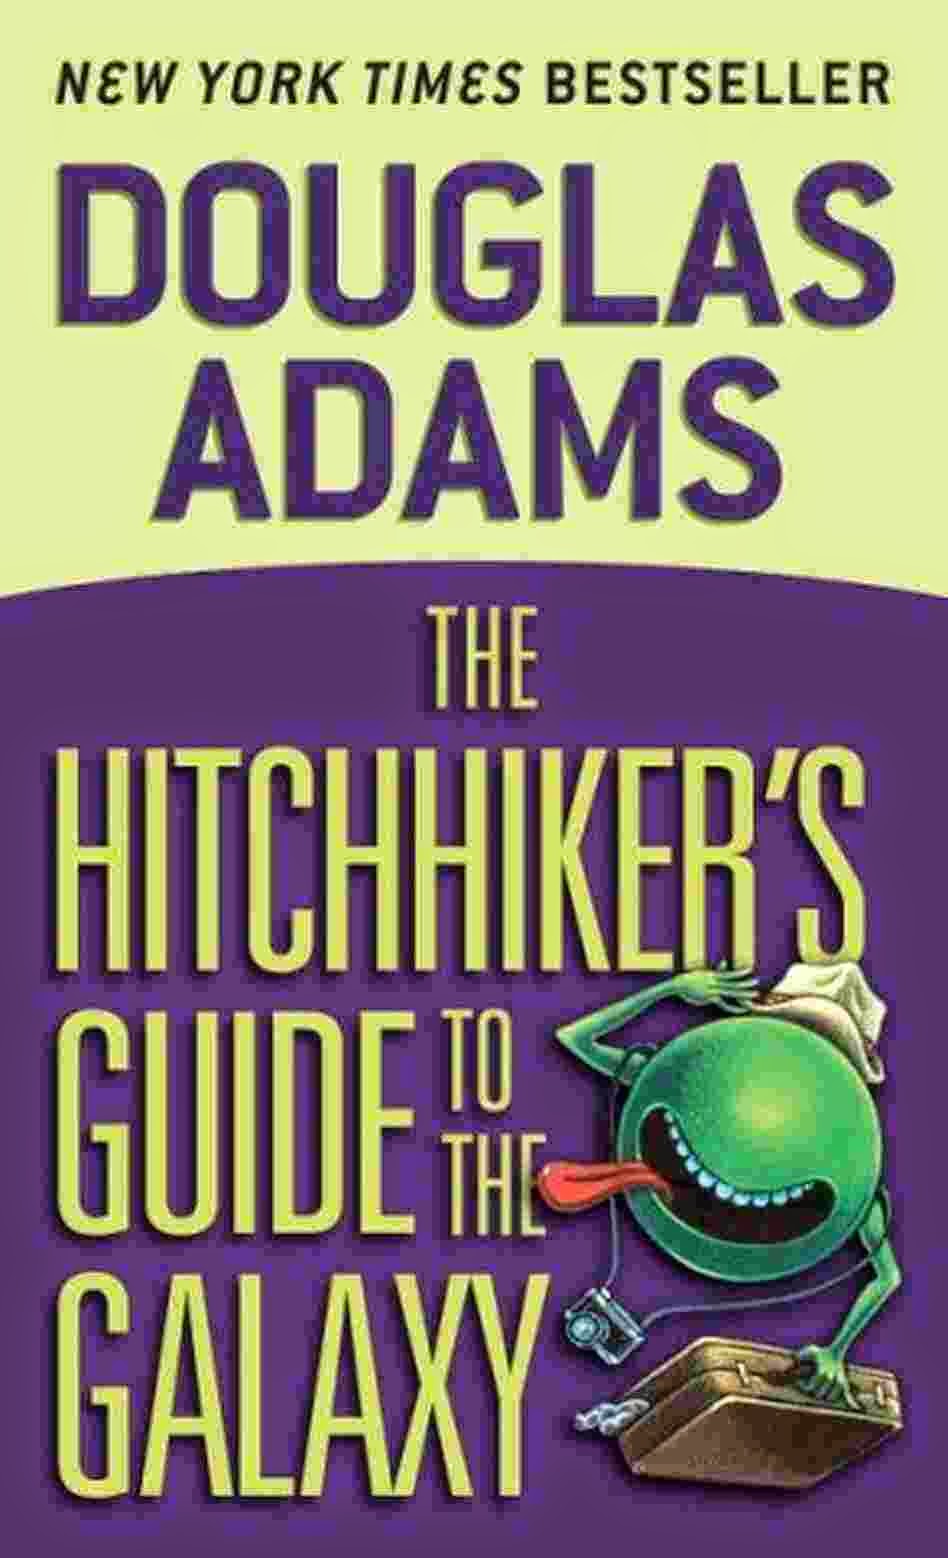 http://discover.halifaxpubliclibraries.ca/?q=title:hitchhiker%27s%20guide%20to%20the%20galaxy